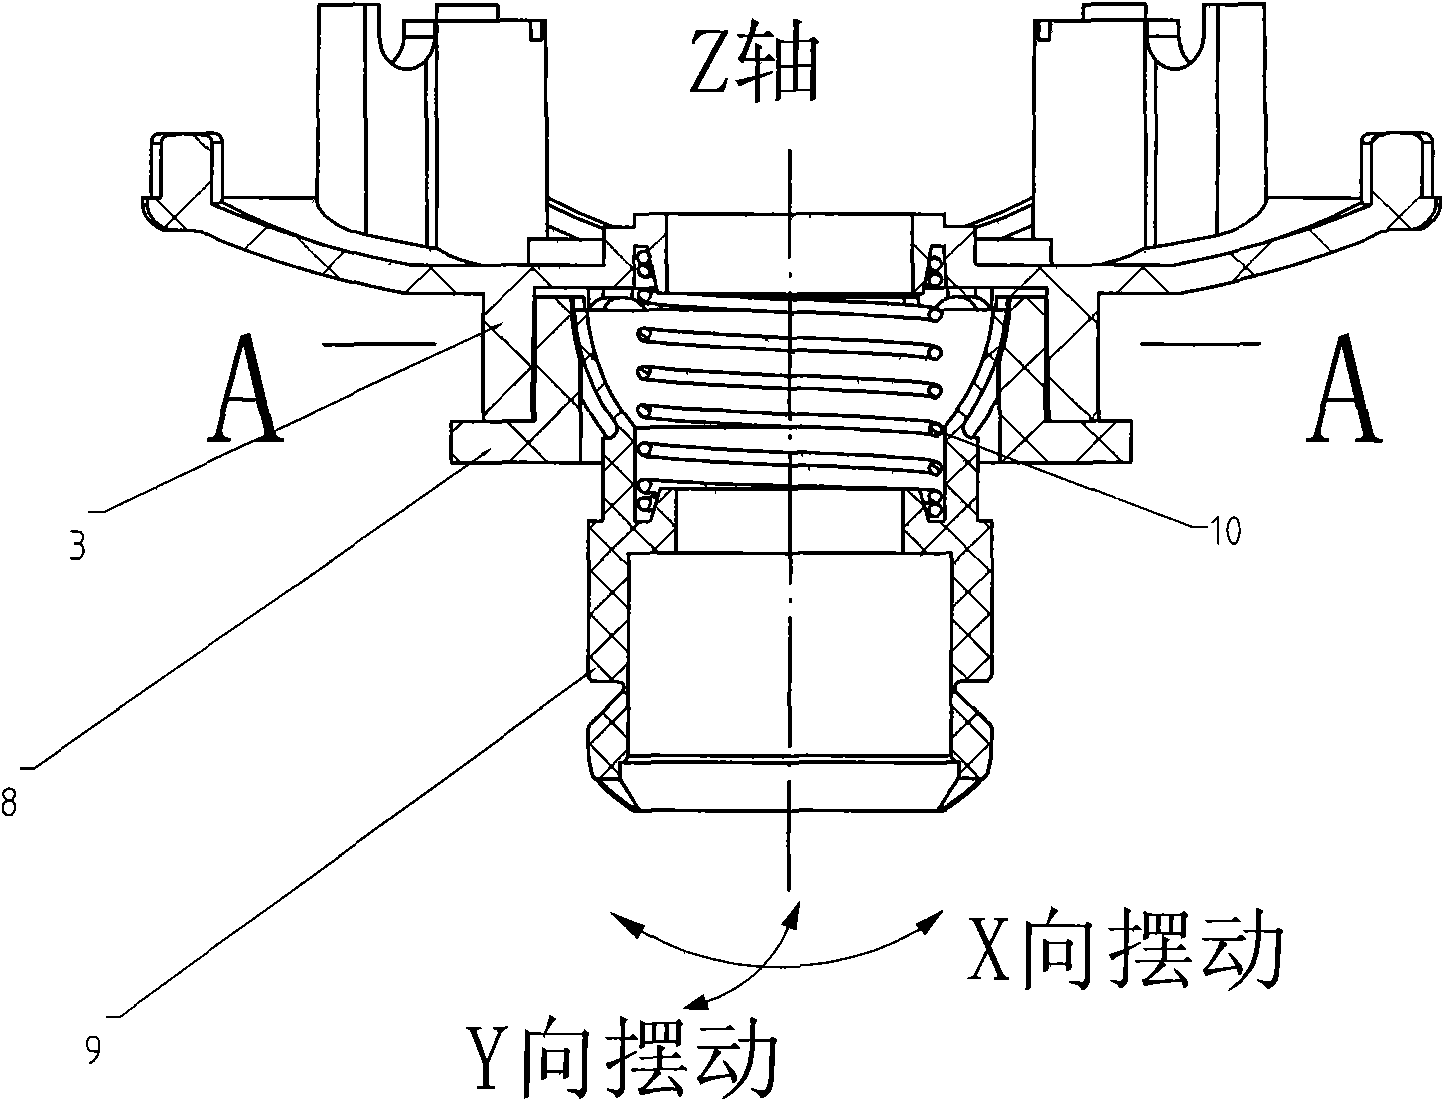 Cutter head structure of detachable electric shaver